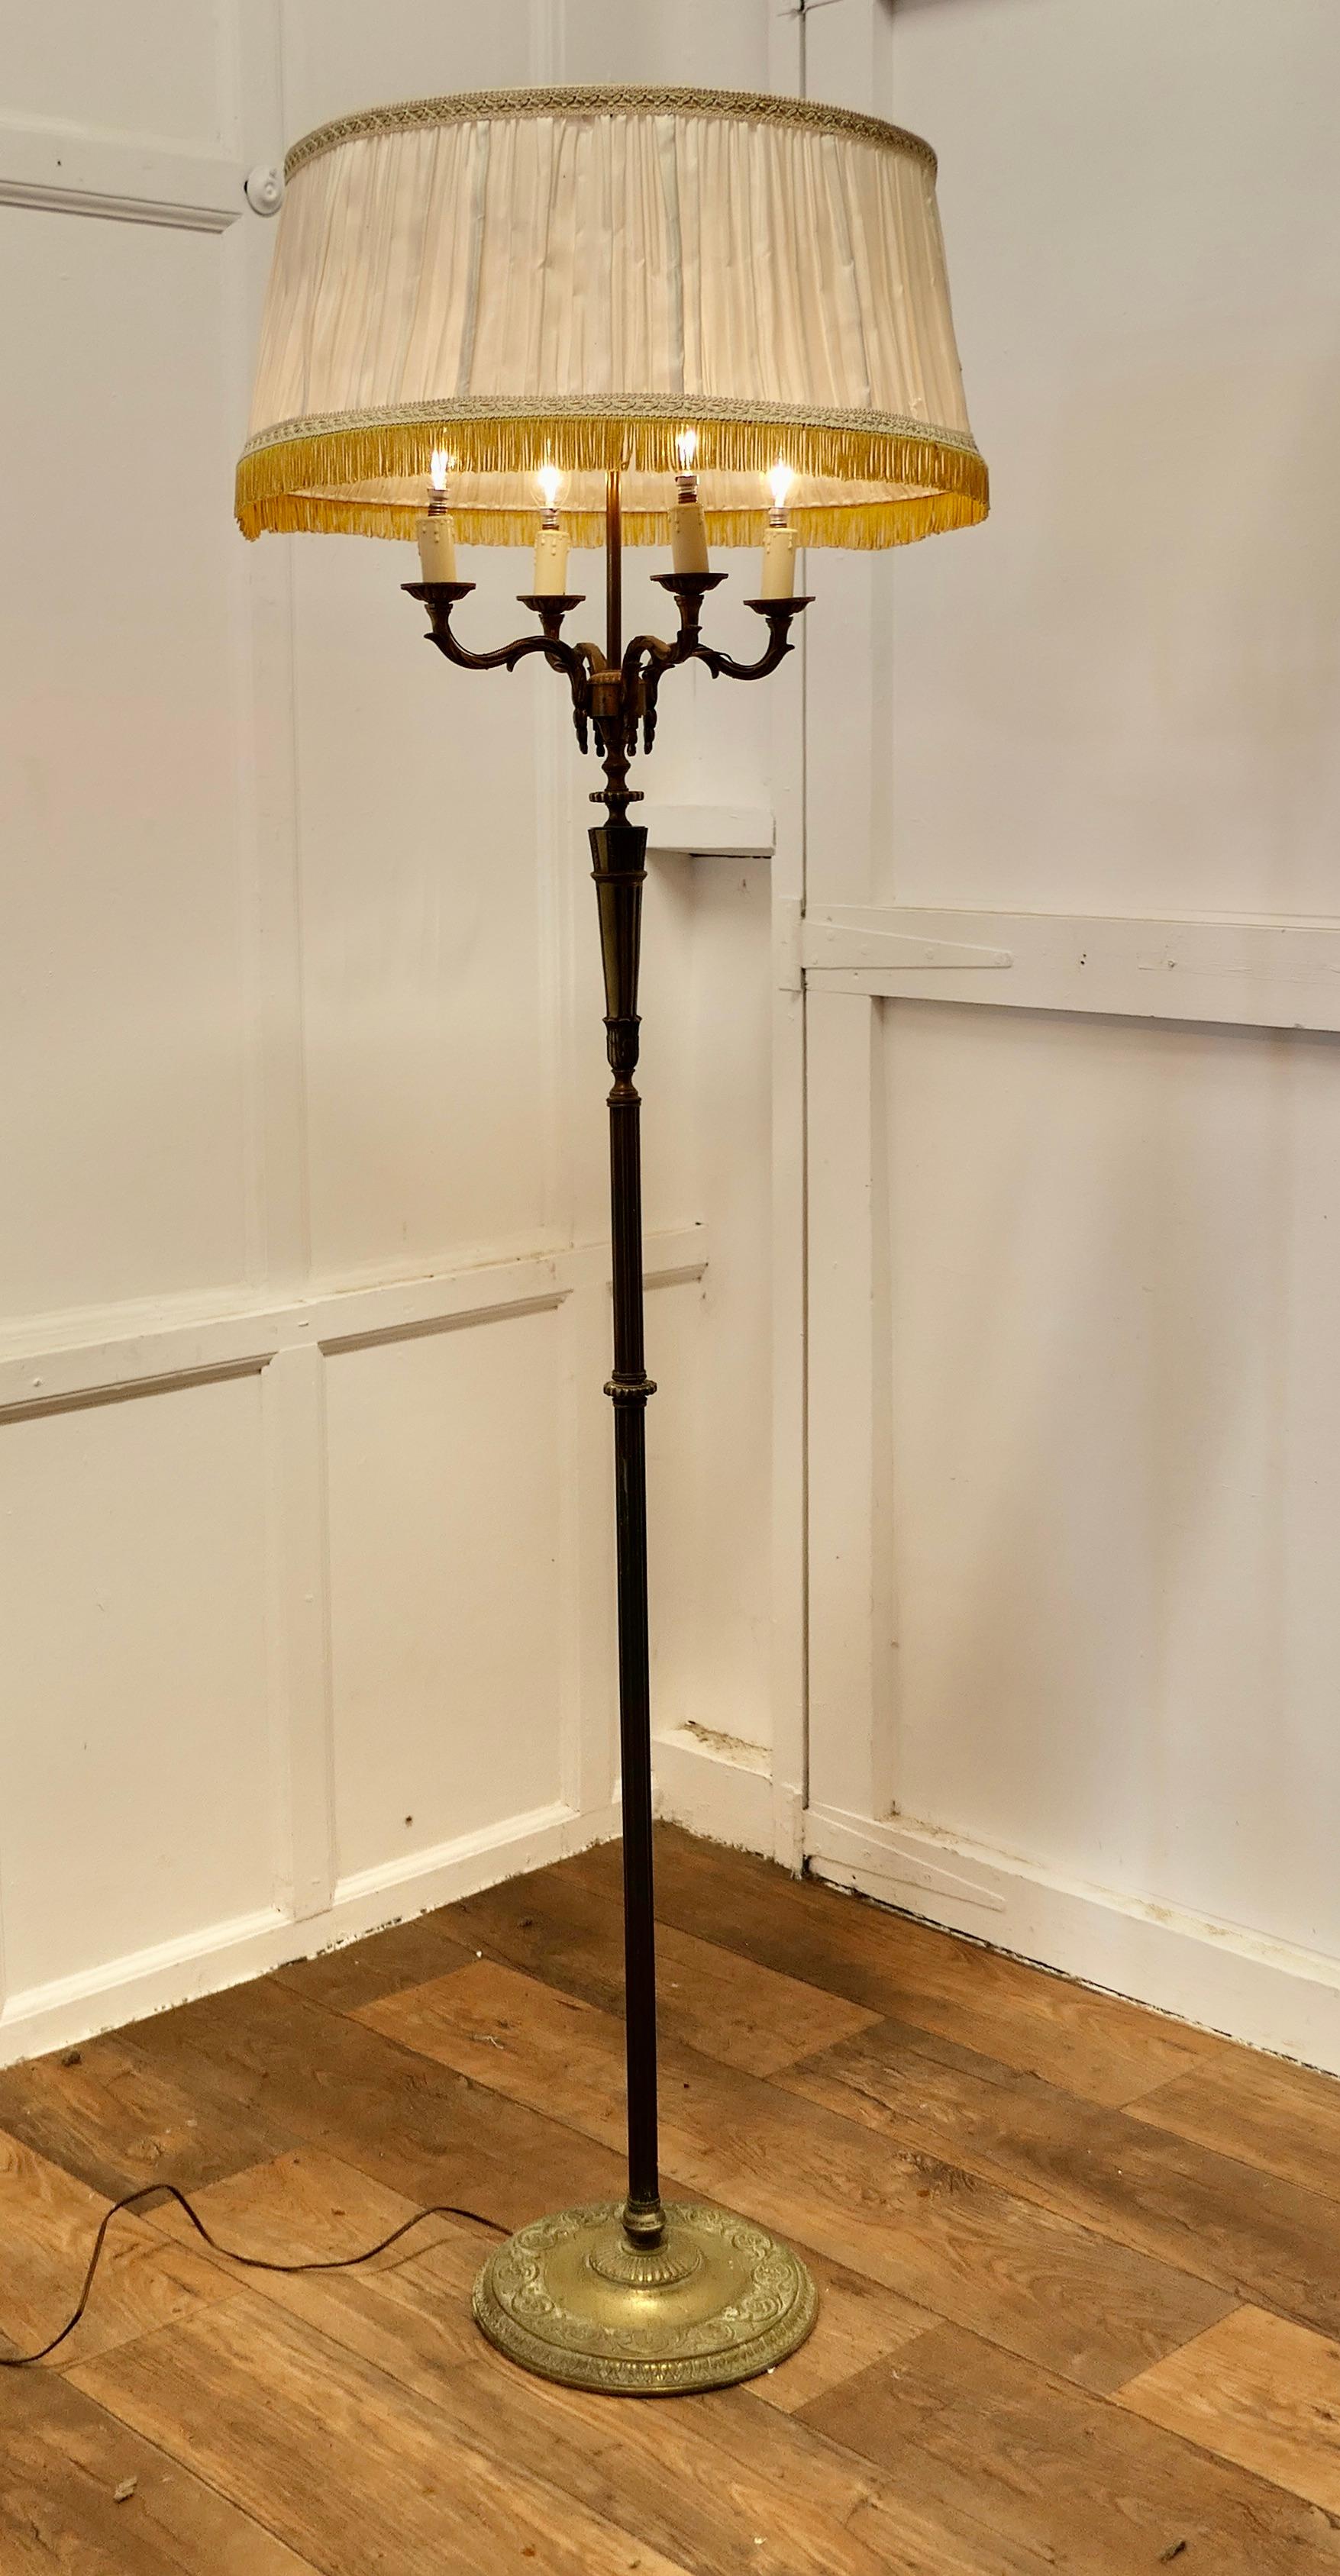 Rococo Gilt Brass Candelabra 4 Branch Floor Lamp, Standard Lamp

This is an elaborate and very attractive piece, the lamp has a decorative upright set on a round base this supports a 4 branch candelabra 
The lamp comes with an original silk shade,